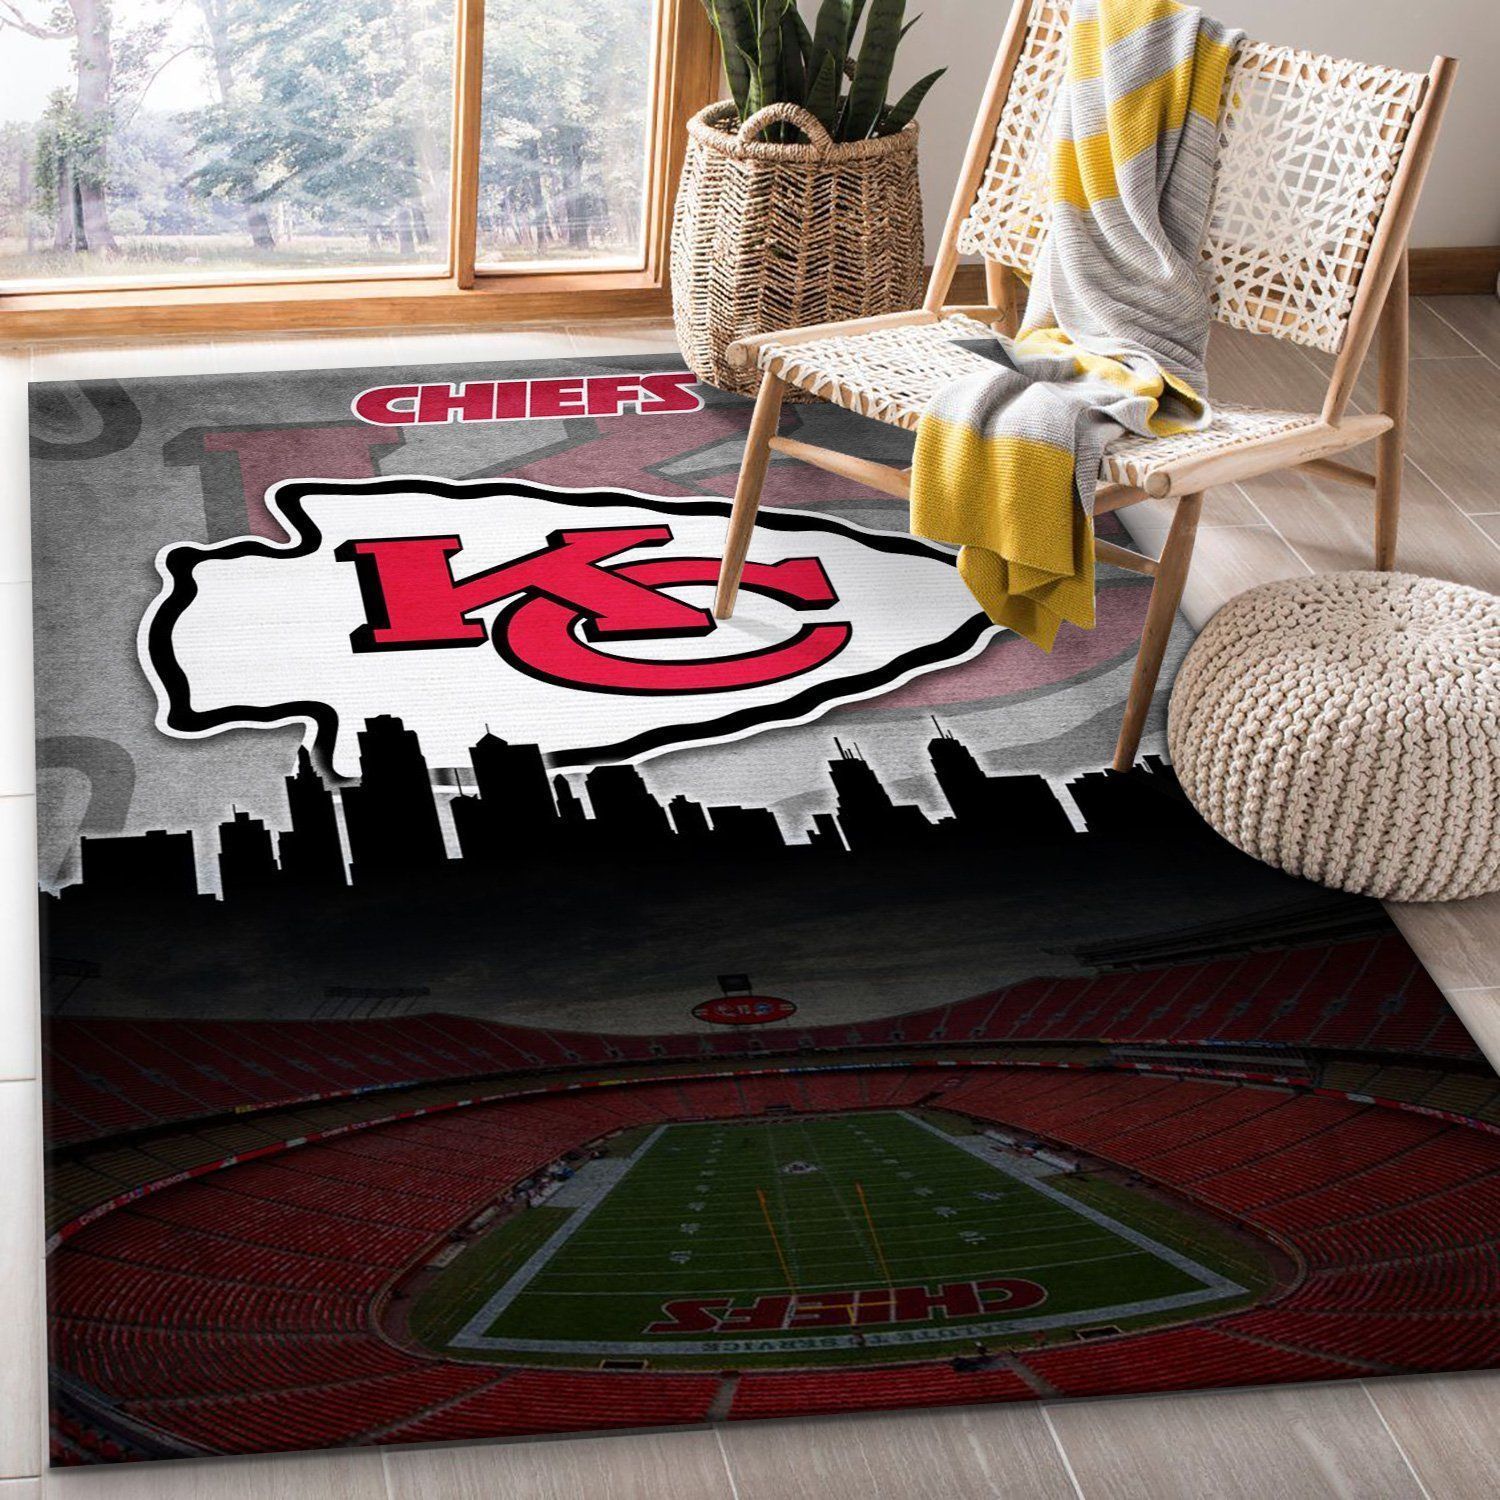 Kansas City Chiefs Nfl Area Rug For Christmas Bedroom Rug Christmas Gift US Decor - Indoor Outdoor Rugs